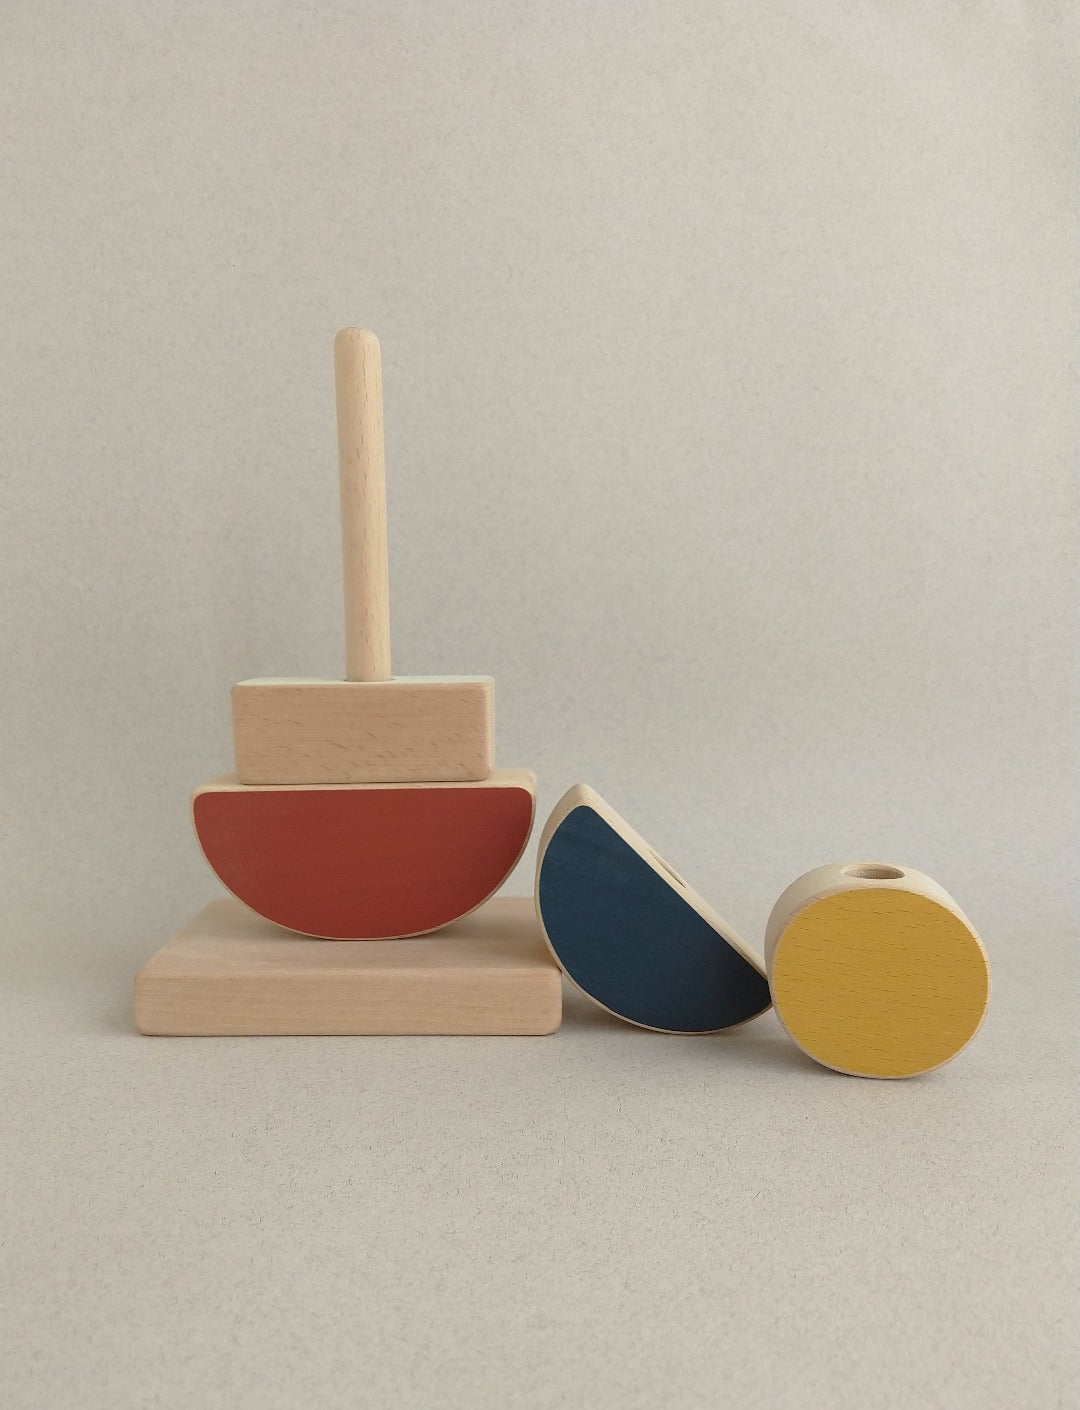 Our wooden toys are hand-cut, hand-painted and sanded satin smooth to offer soft surfaces for little hands.